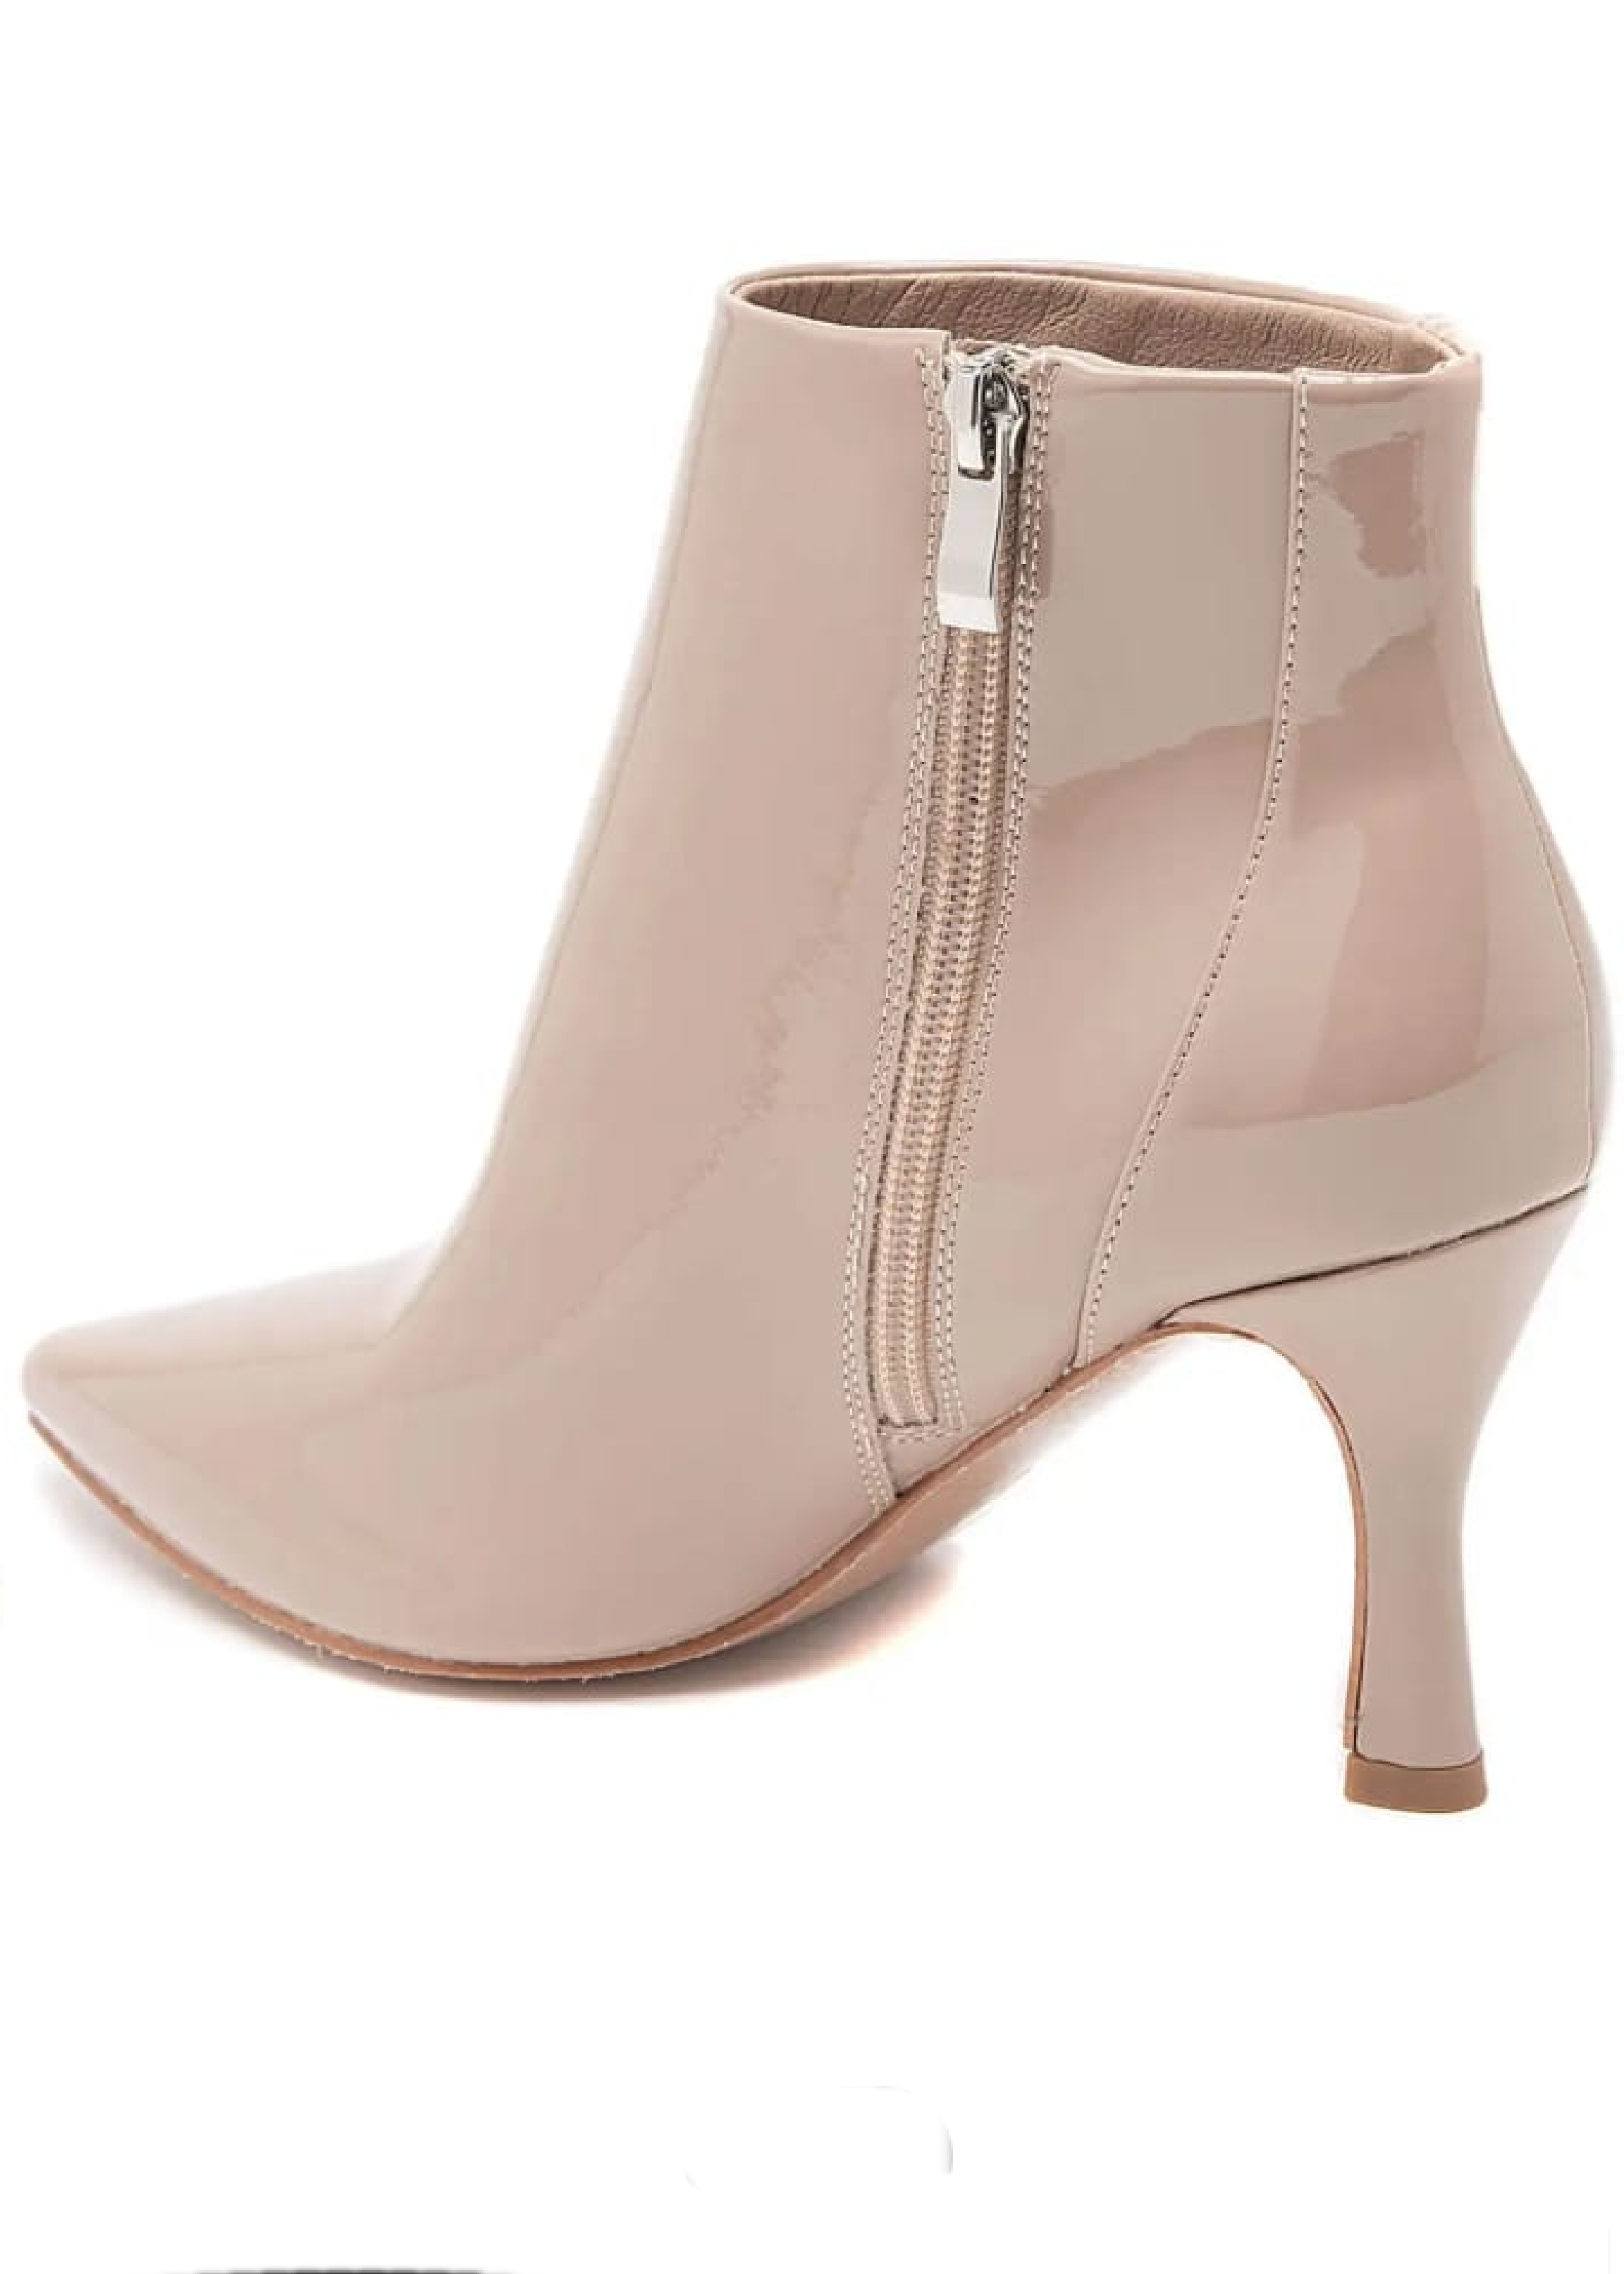 Scilla Beige Patent Ankle Boots